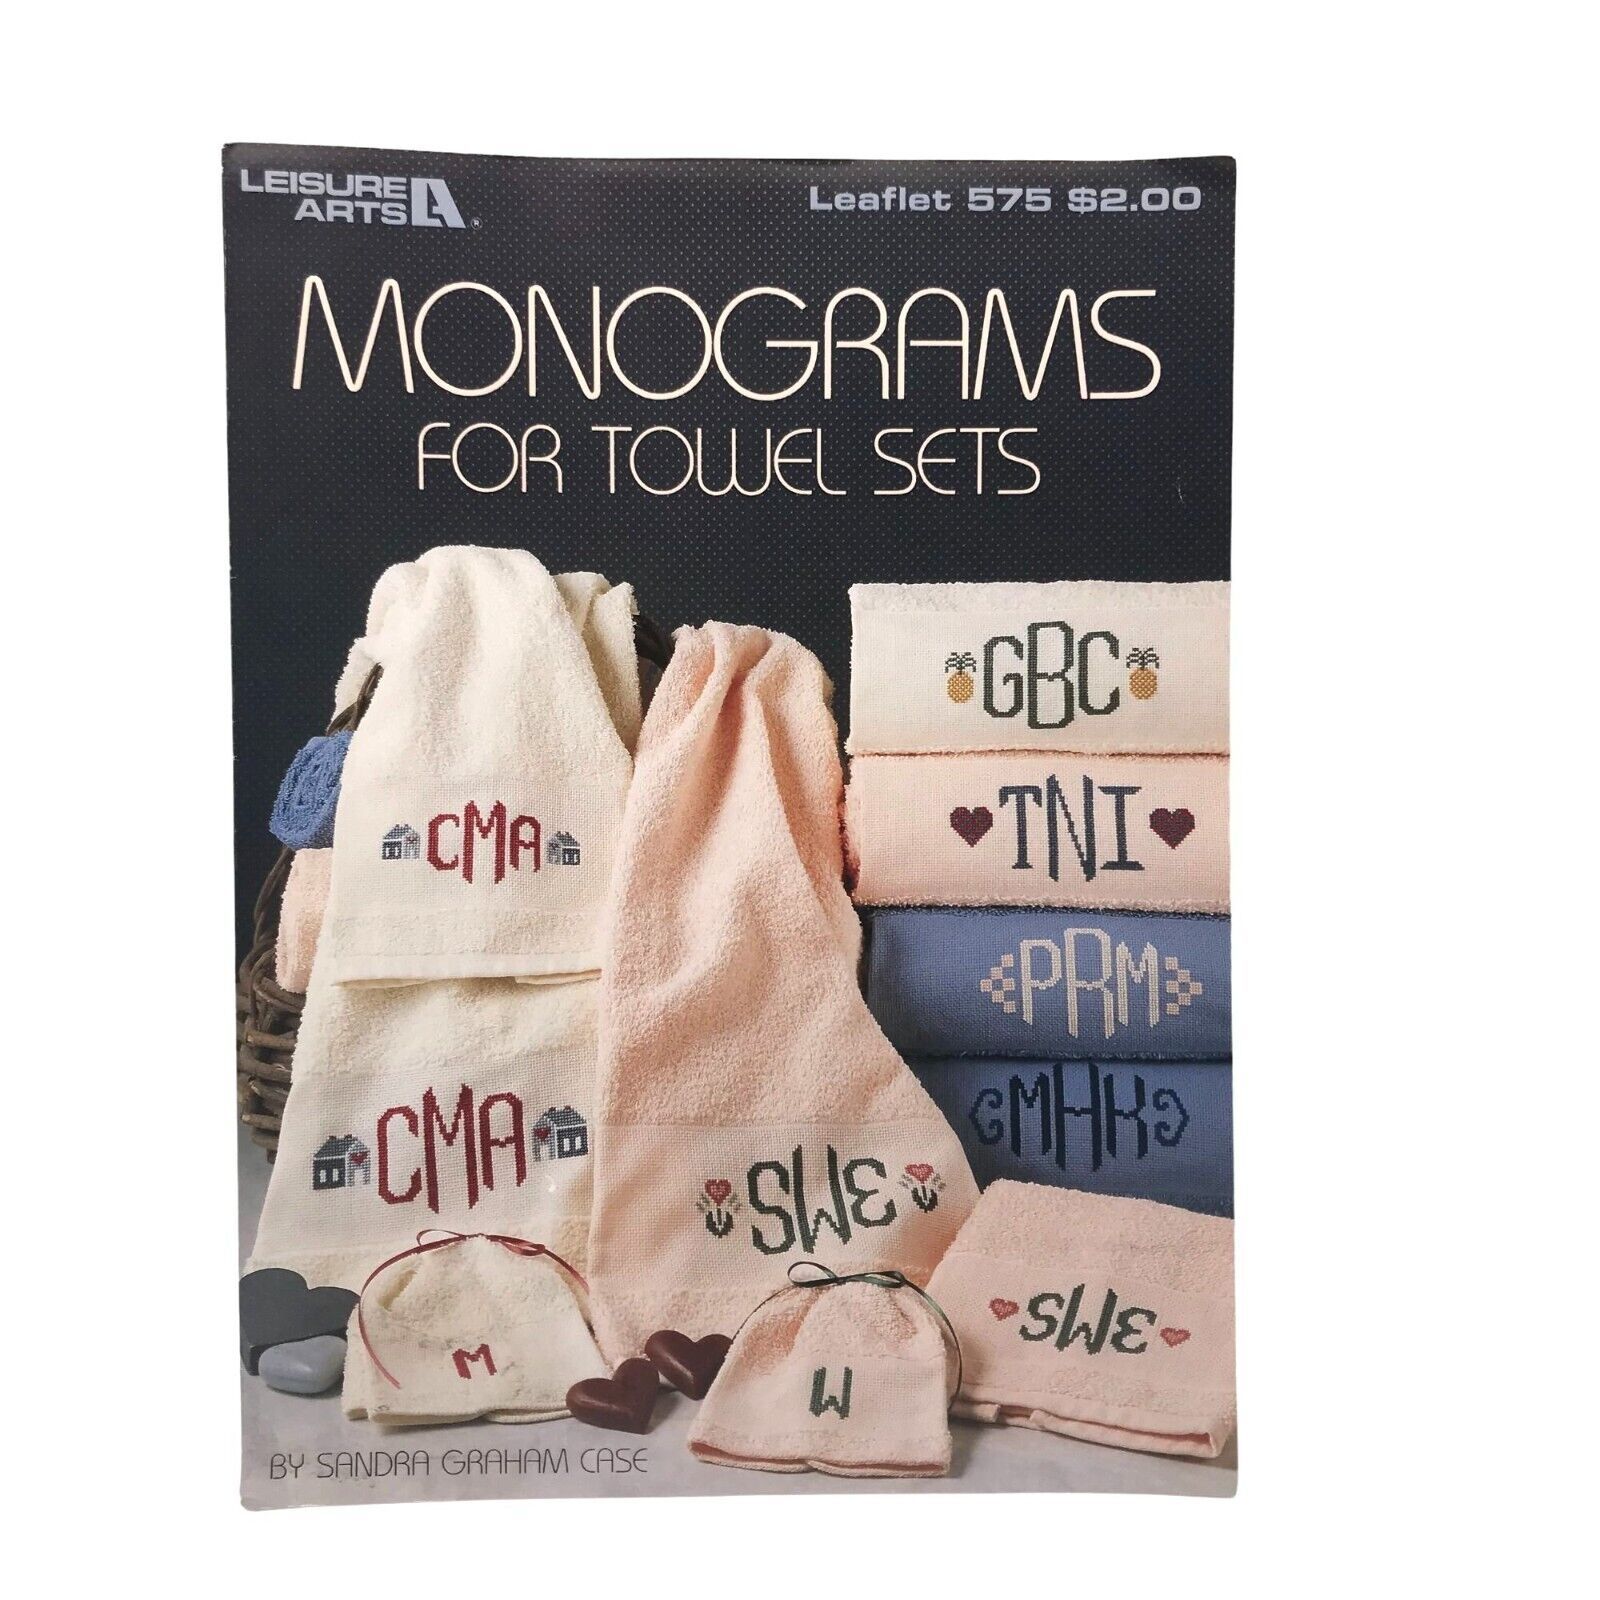 Primary image for Vintage Cross Stitch Patterns, Monograms for Towel Sets by Sandra Graham Case